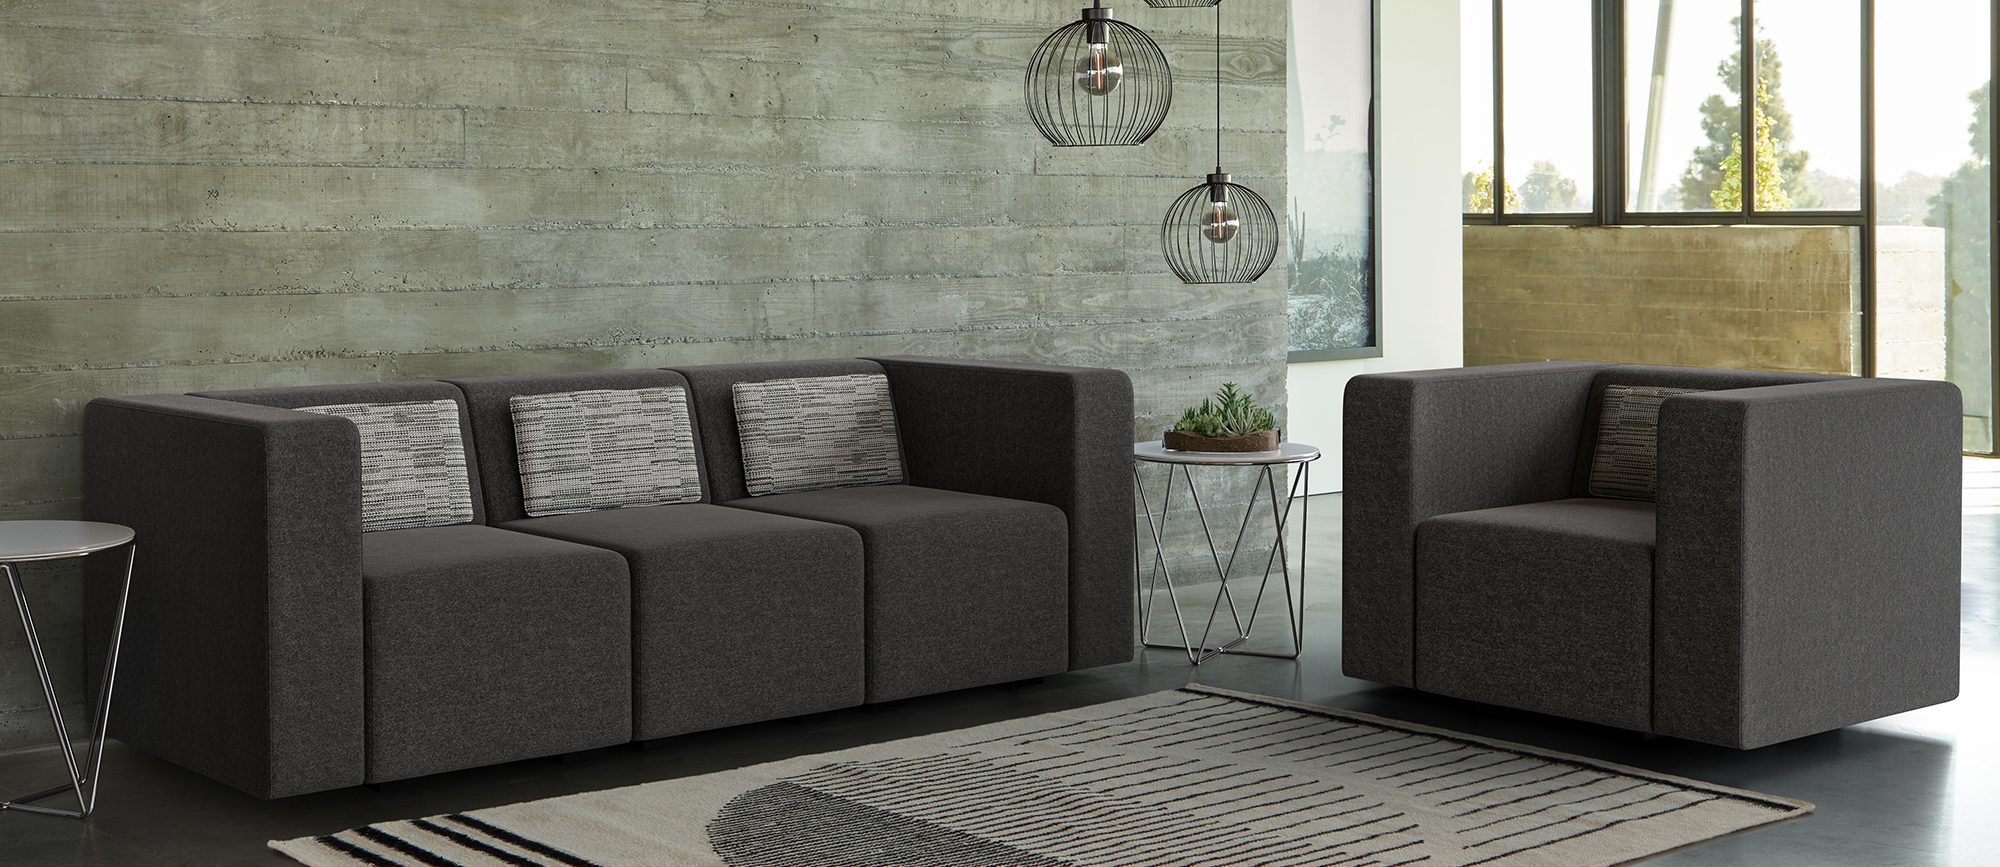 Archetype Three-Seat Unit and Lounge Chair